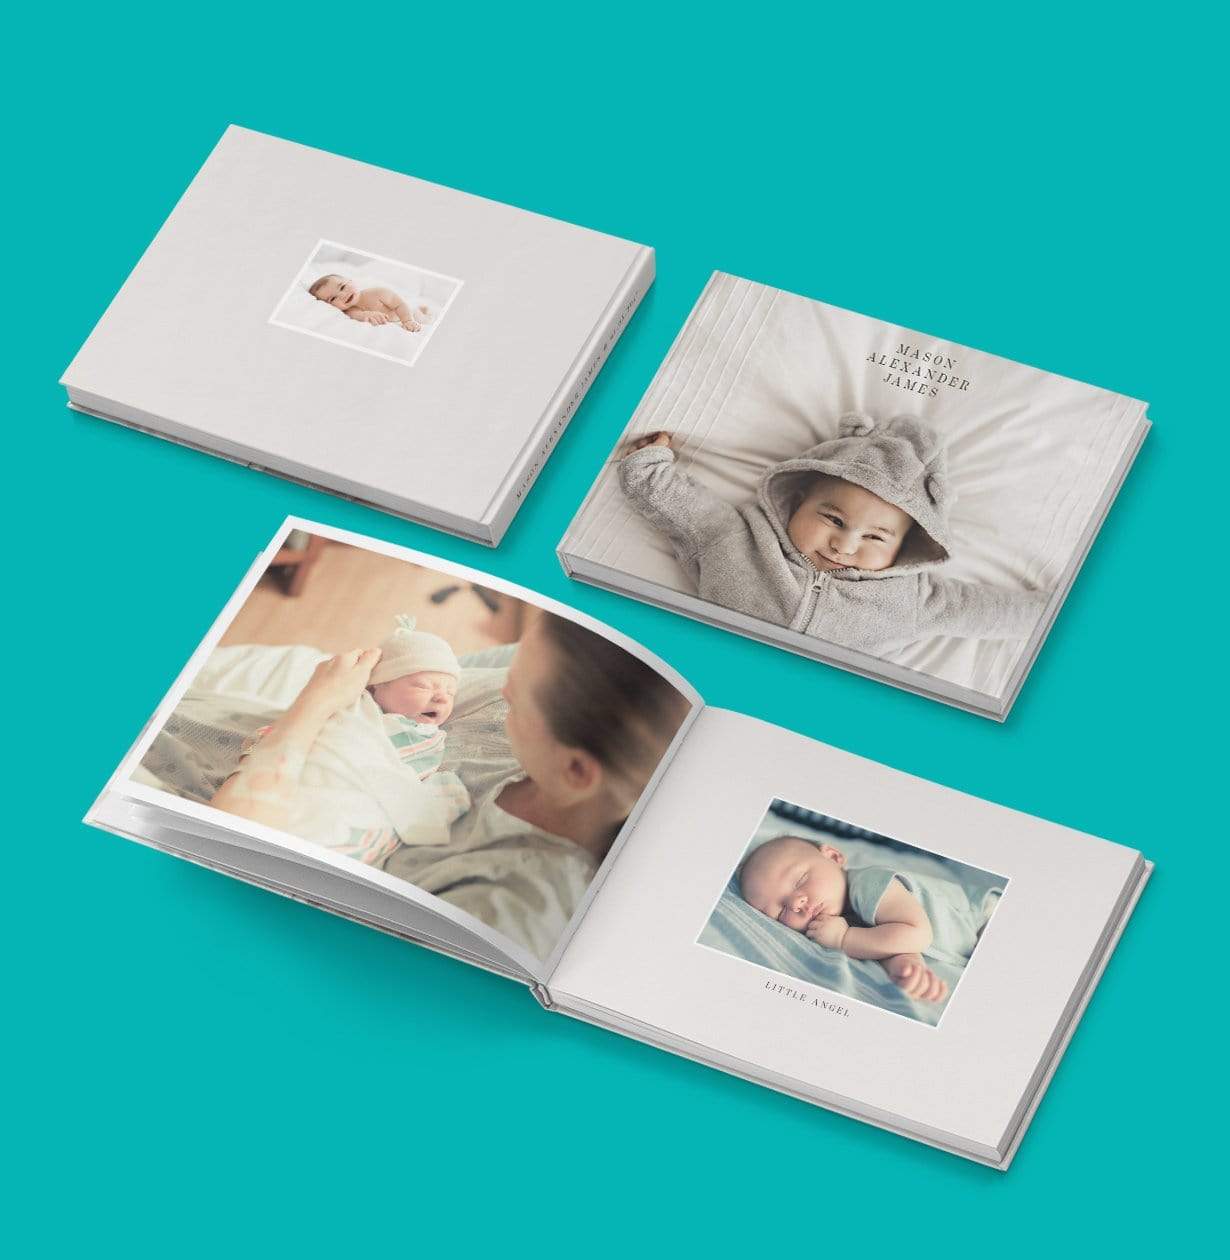 Hardcover Photo Books Printed in Canada by Posterjack